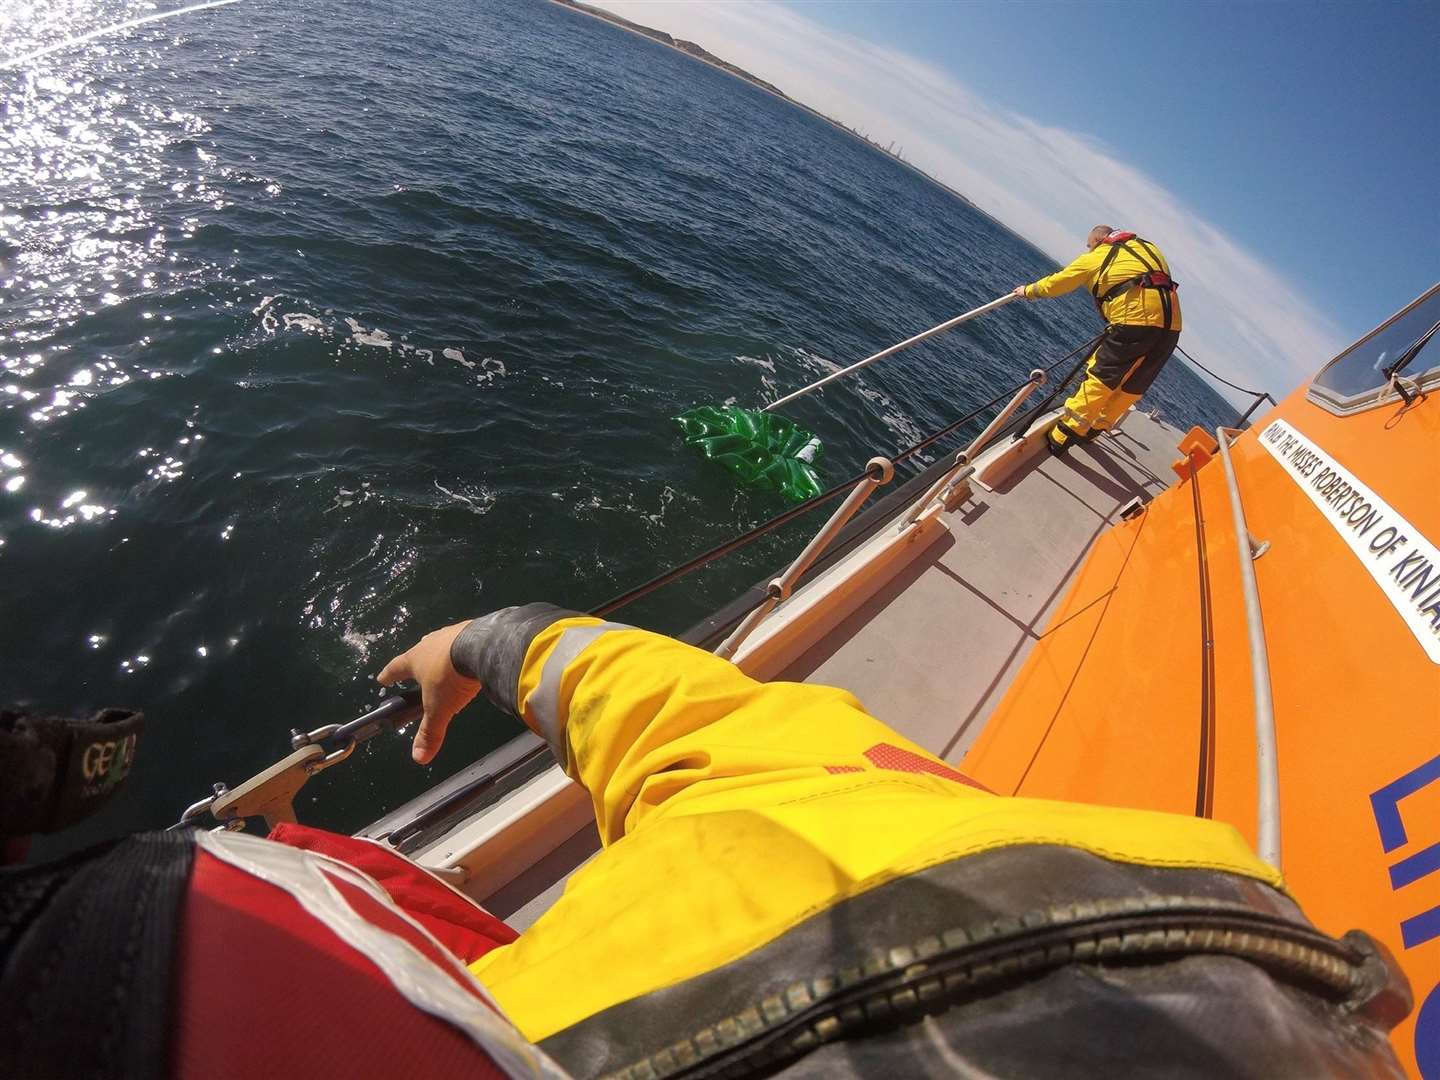 The Peterhead RNLI crew was called out following reports of a child drifitng out to sea on an inflatable.